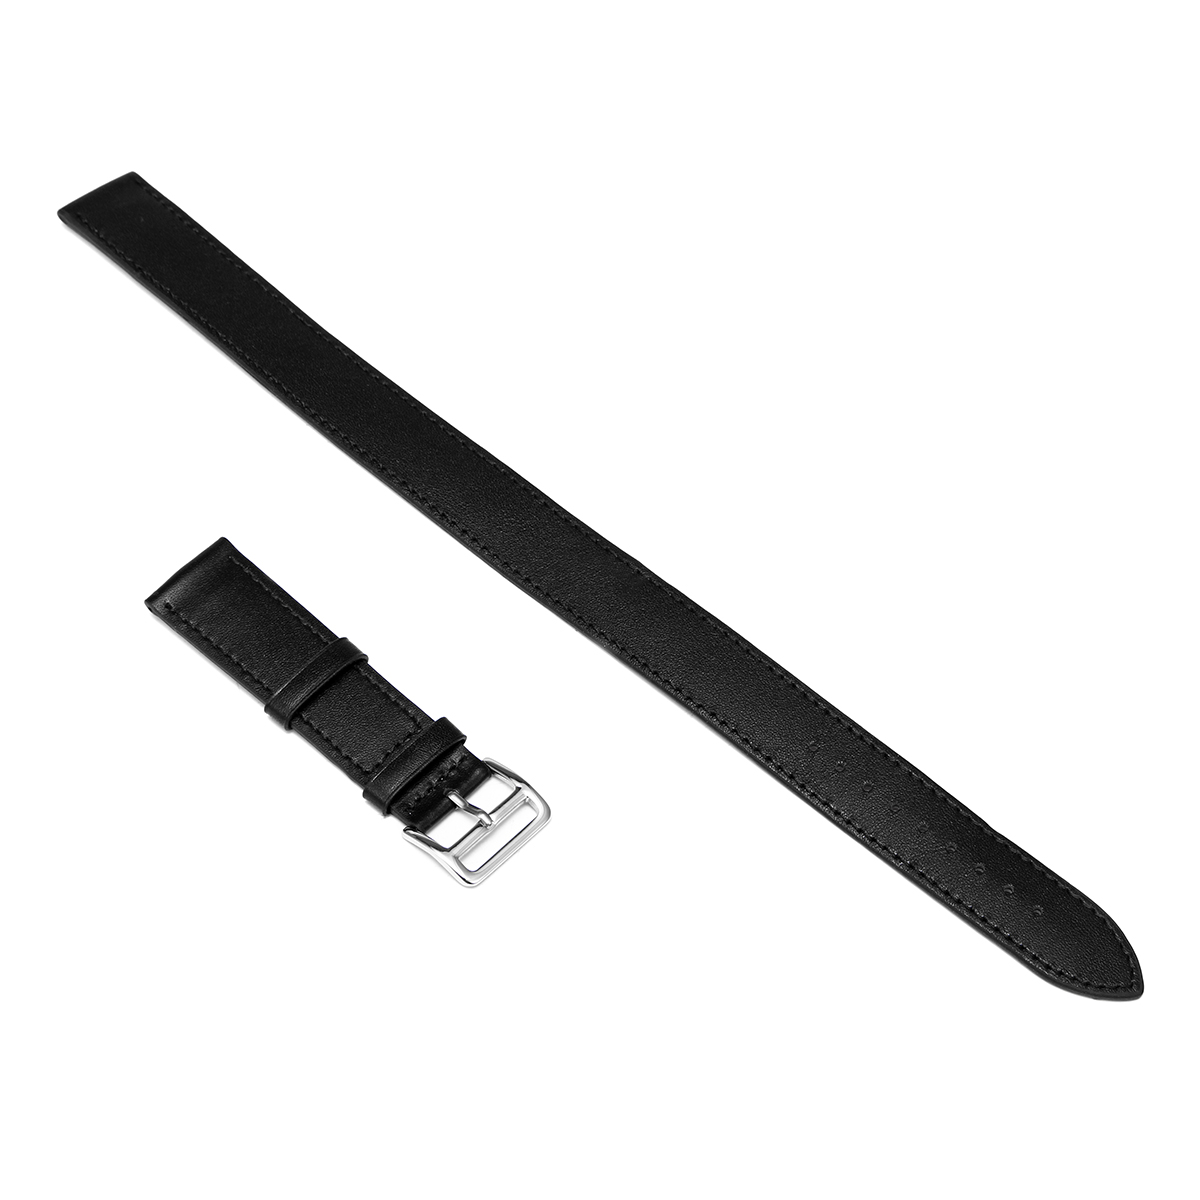 Genuine-Leather-Watch-Band-Strap-Replacement-For-Apple-Watch-Series-1-42mm-1306681-2